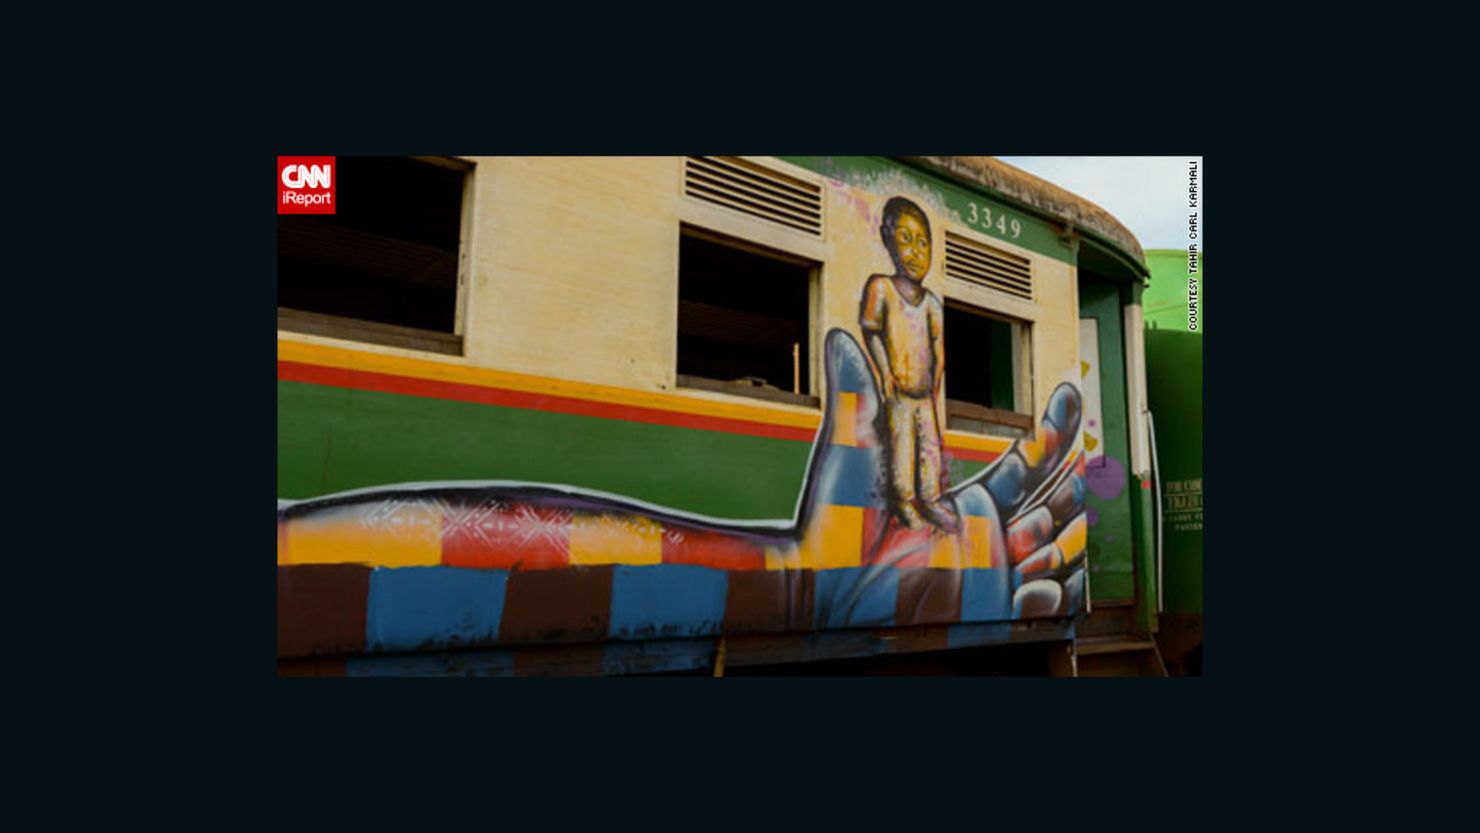 Graffiti, social media, artwork -- Kenyans have used many methods to promote peace in the elections.